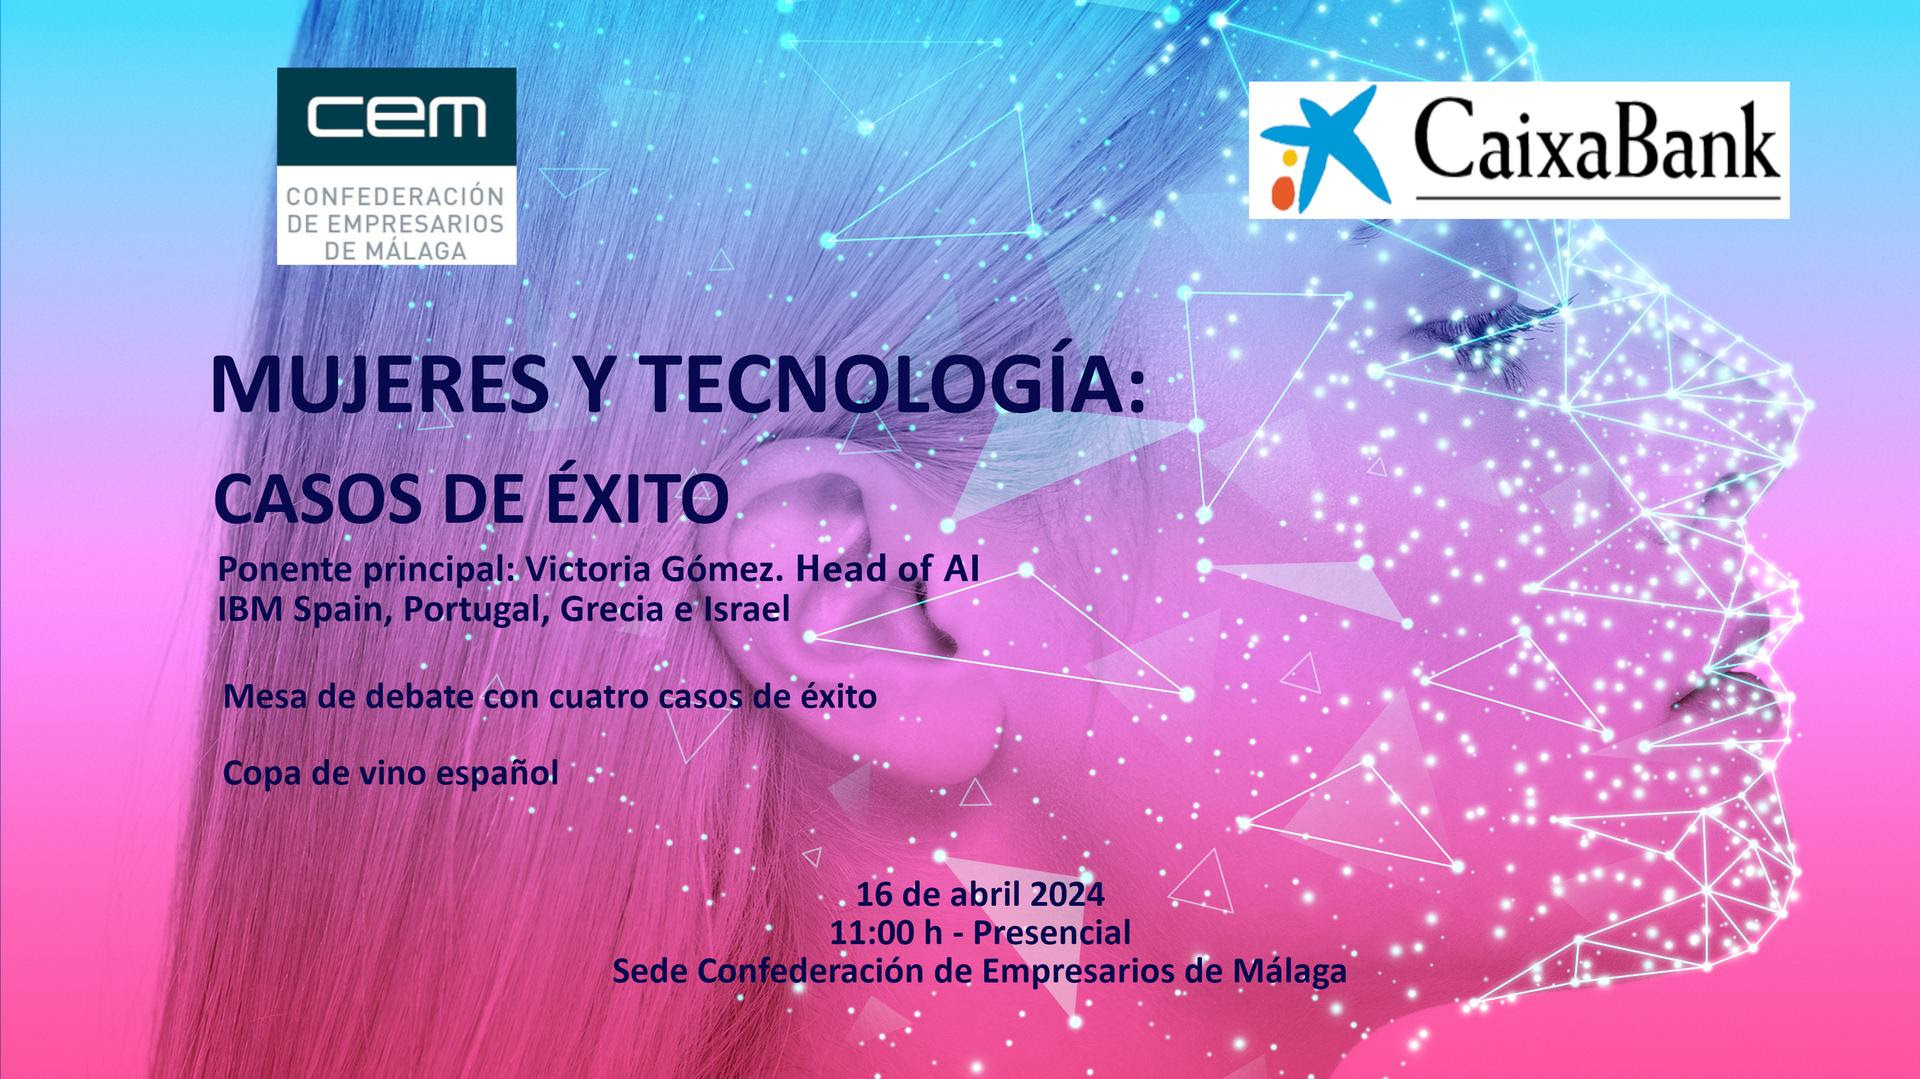 CEM conference 'Women and technology: success stories' on the challenges and opportunities of Artificial Intelligence